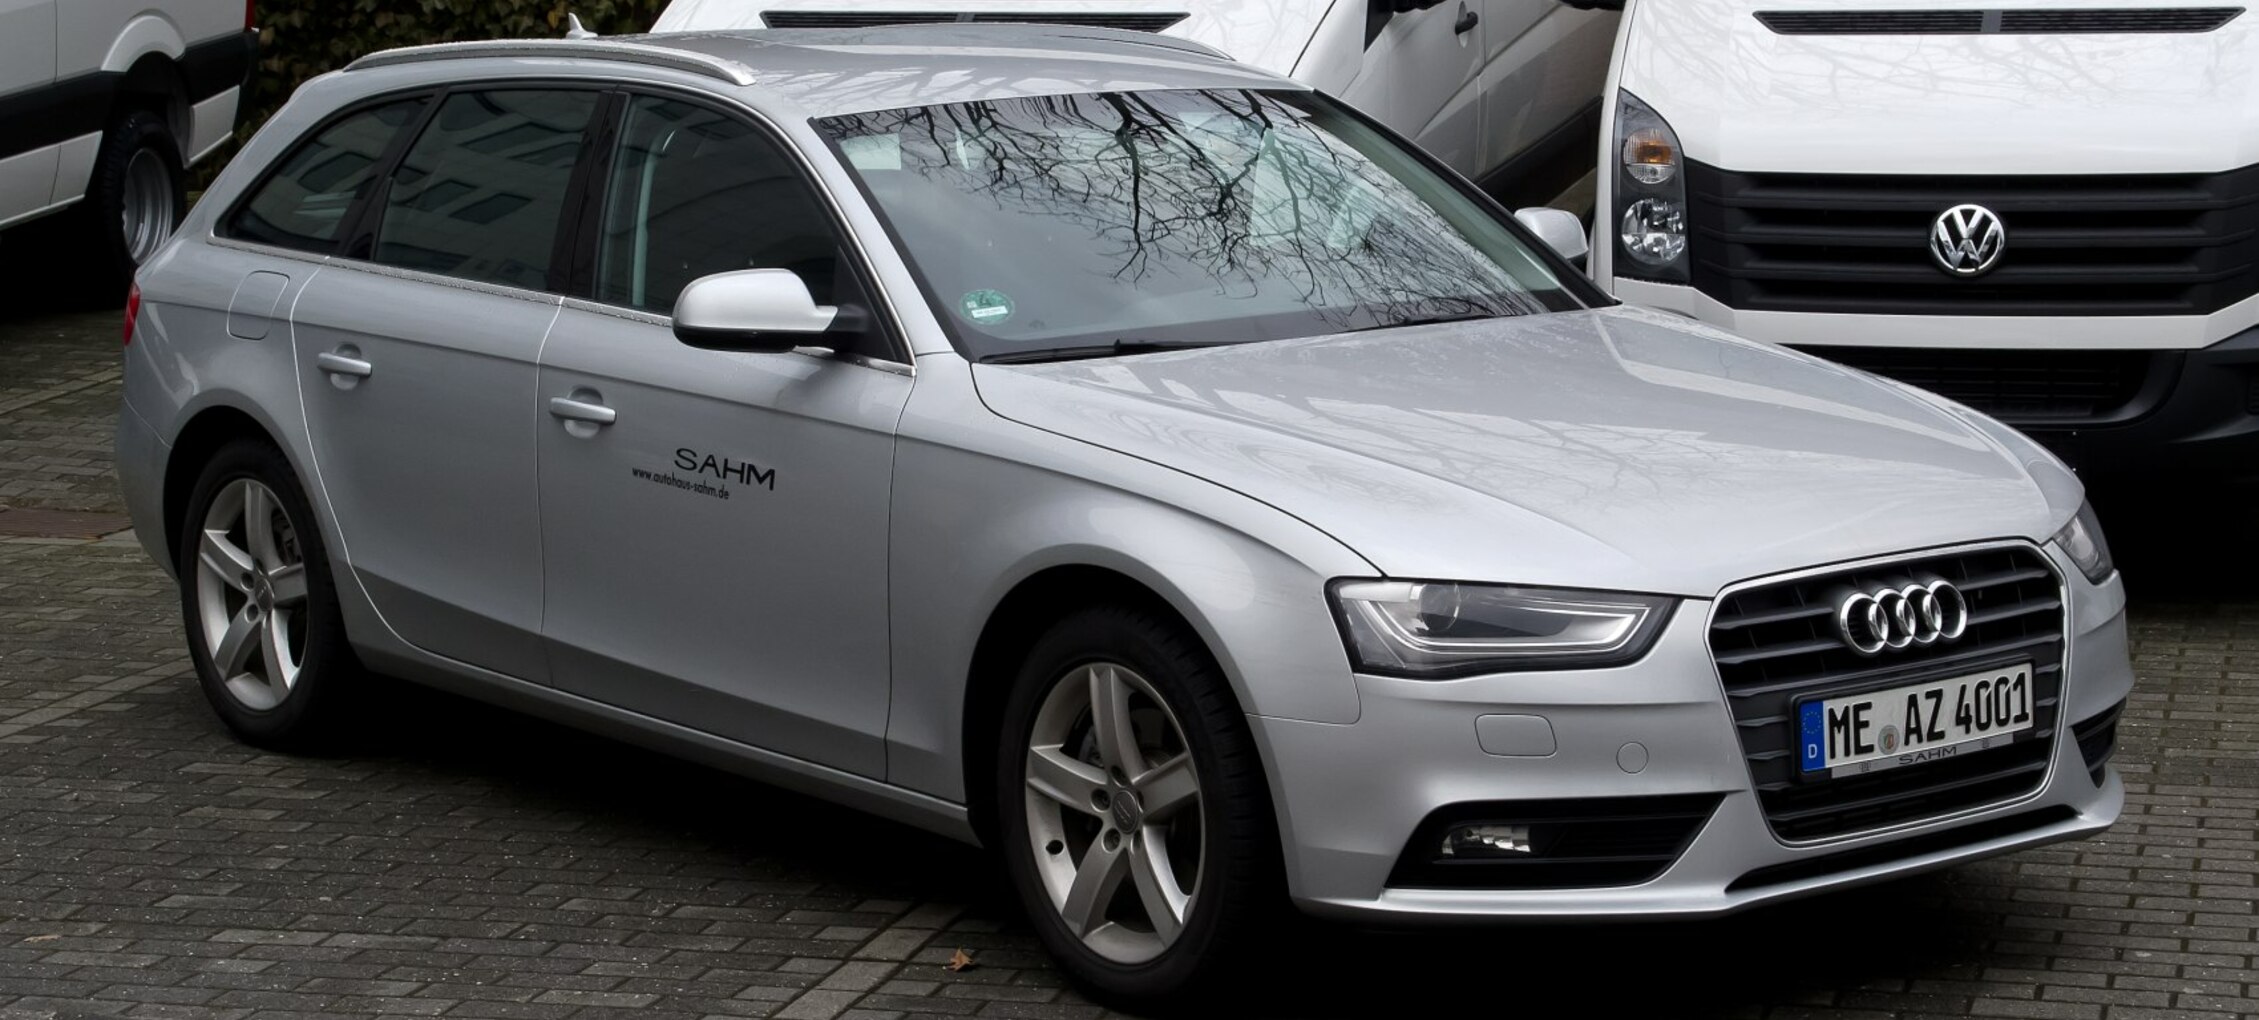 Audi A4 Avant (B8 8K, facelift 2011) 2.0 TDI (150 Hp) quattro DPF 2013,  2014, 2015 specifications, prices & reviews